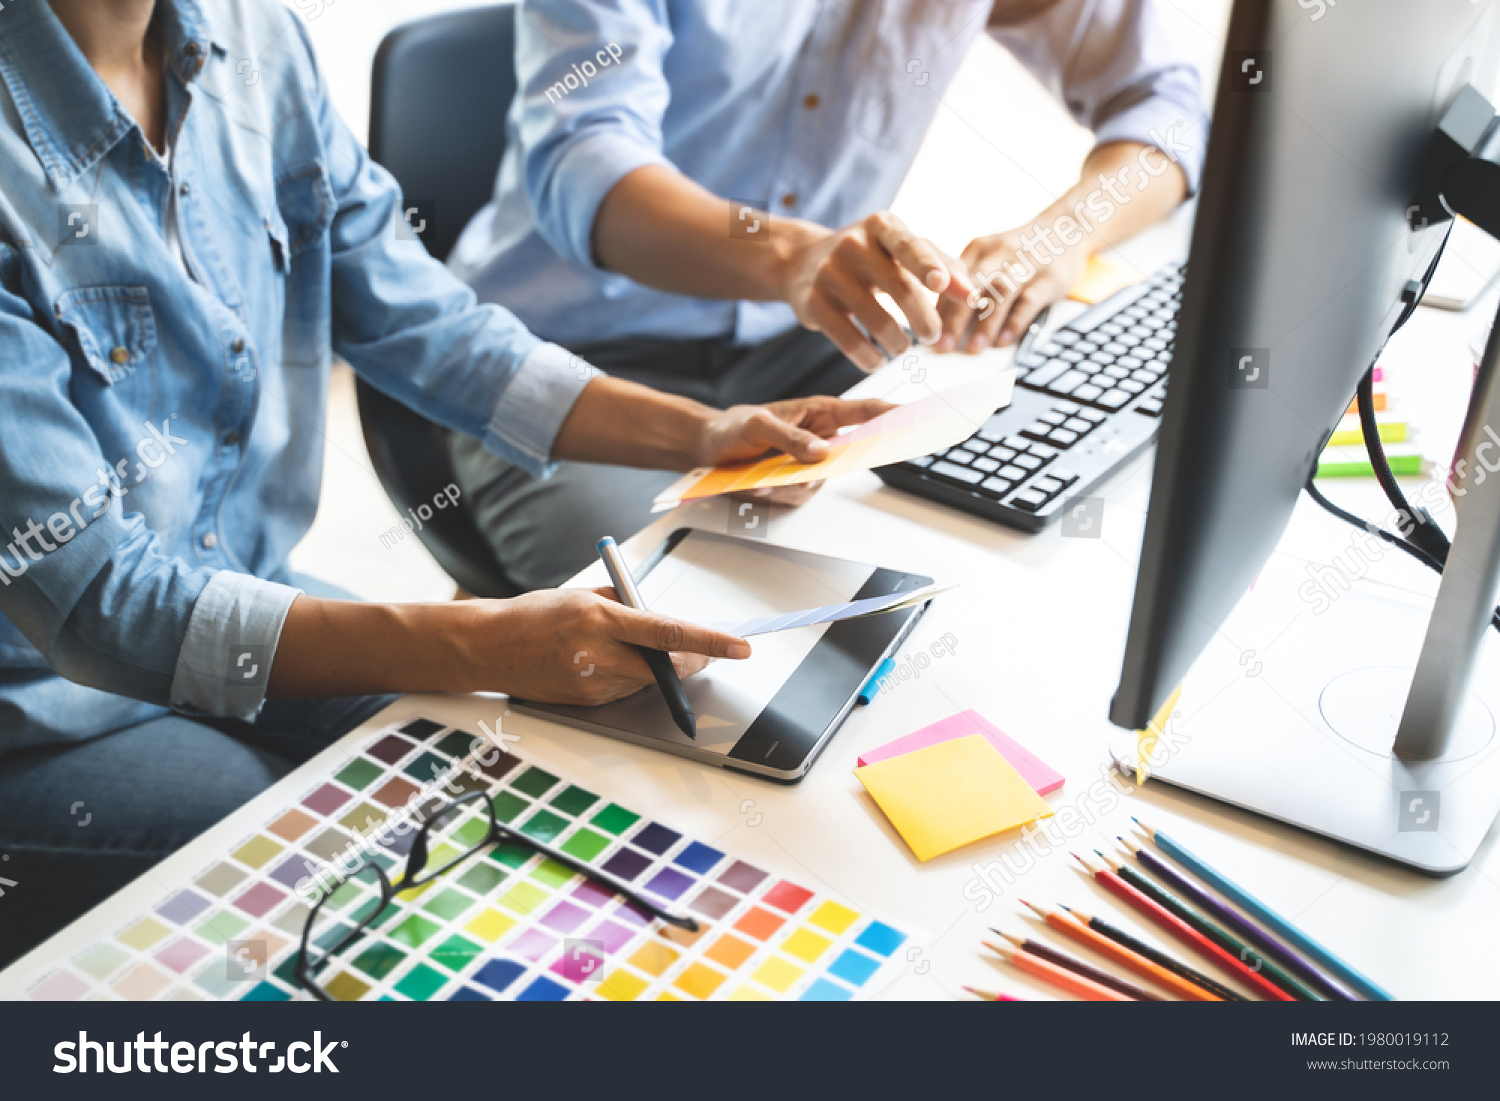 Graphic design using graphics tablet 
drawing creative logo design brand designer sketch with Color swatch samples #1980019112